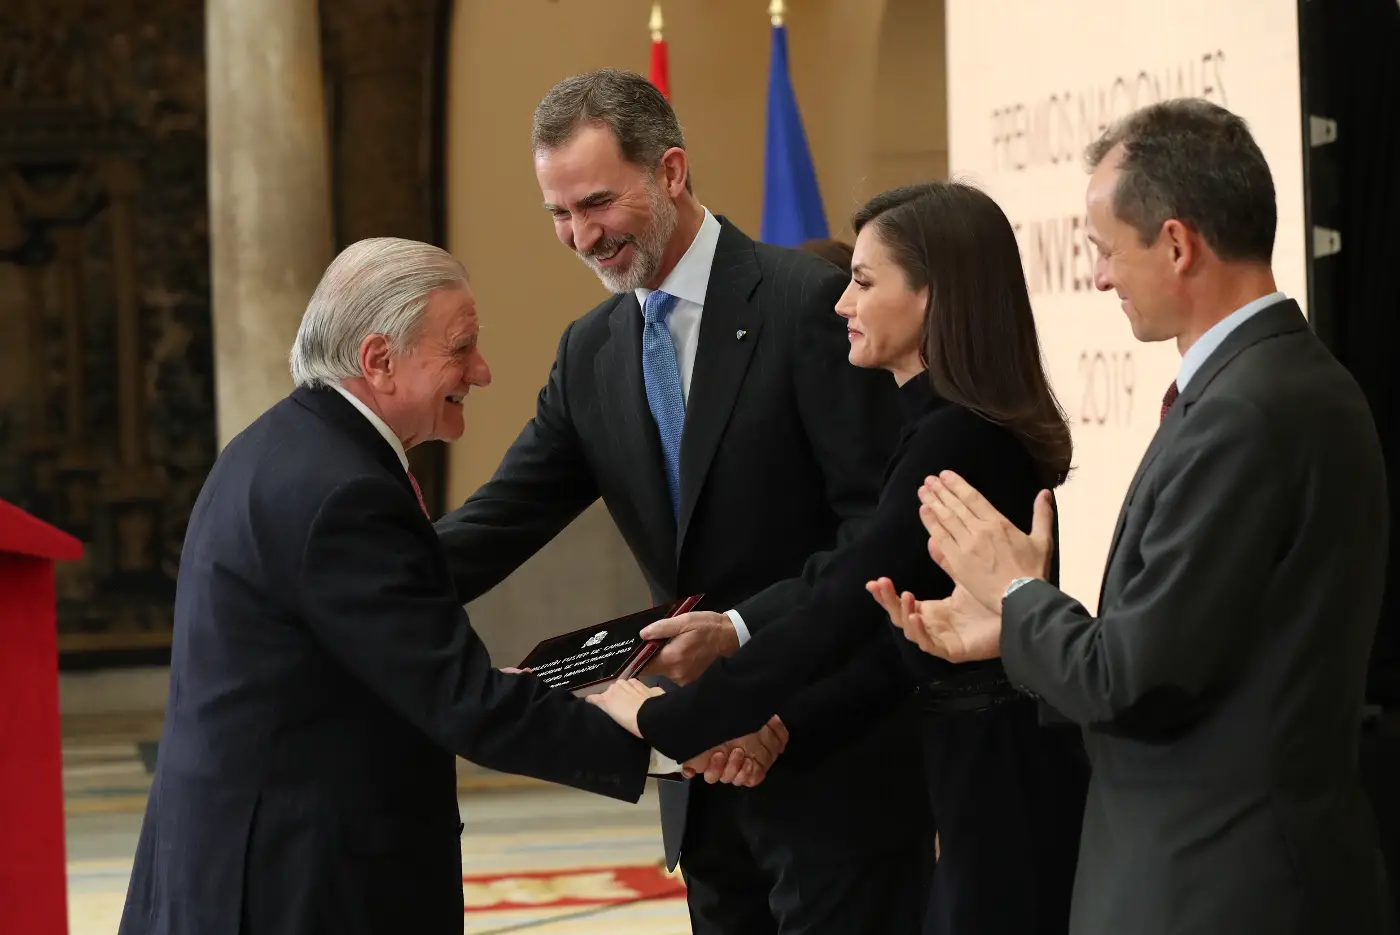 Felipe and Letizia presented the National awards to this year's winners.